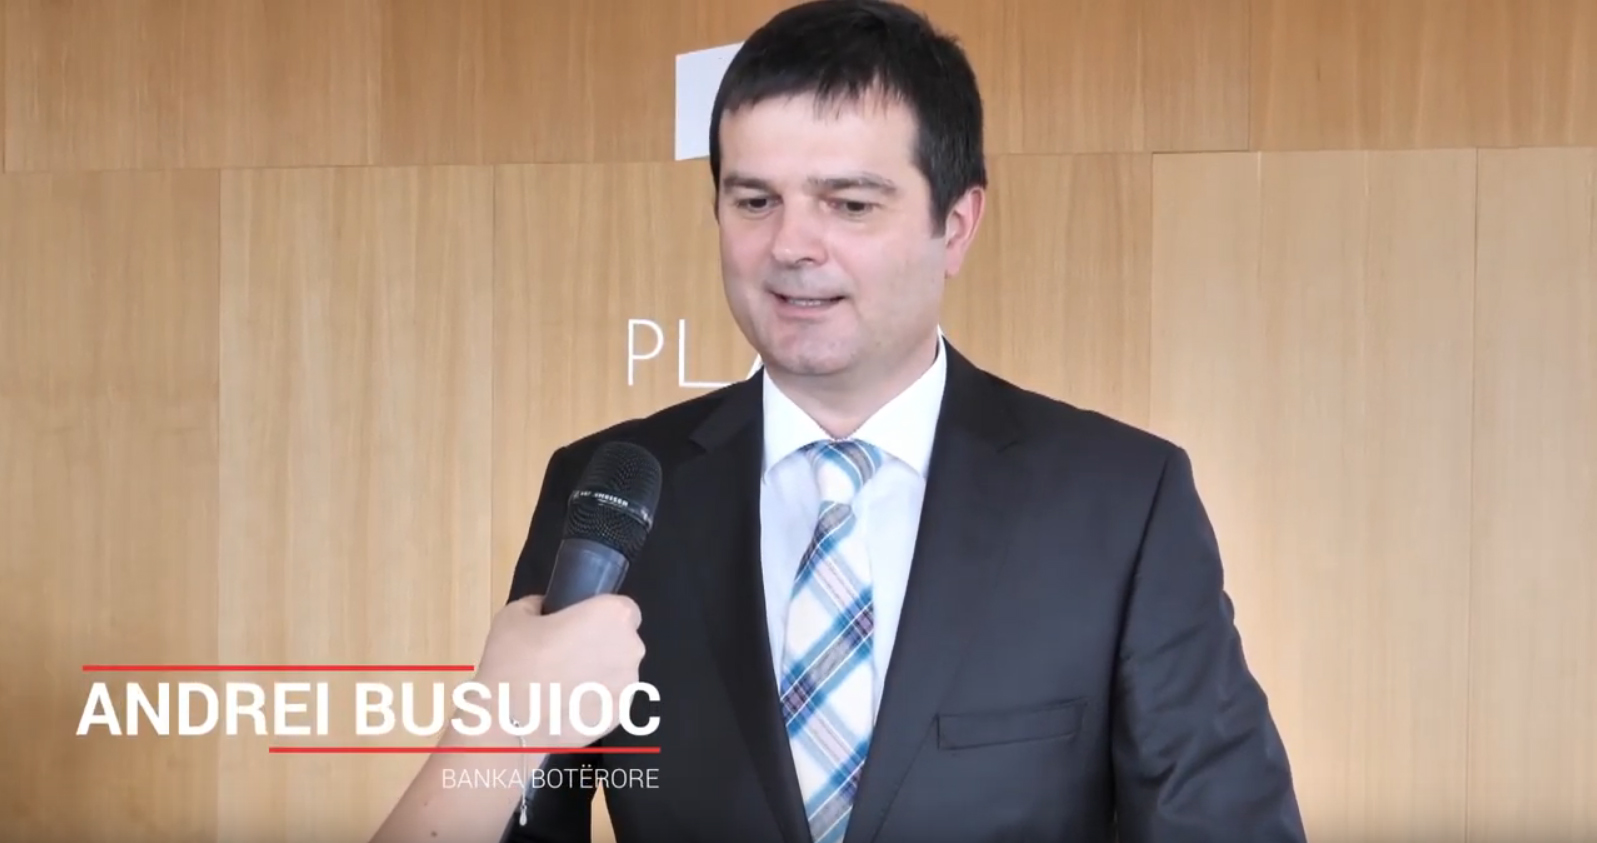 Interview with Andrei Busuioc: Albania's progress in financial reporting reform